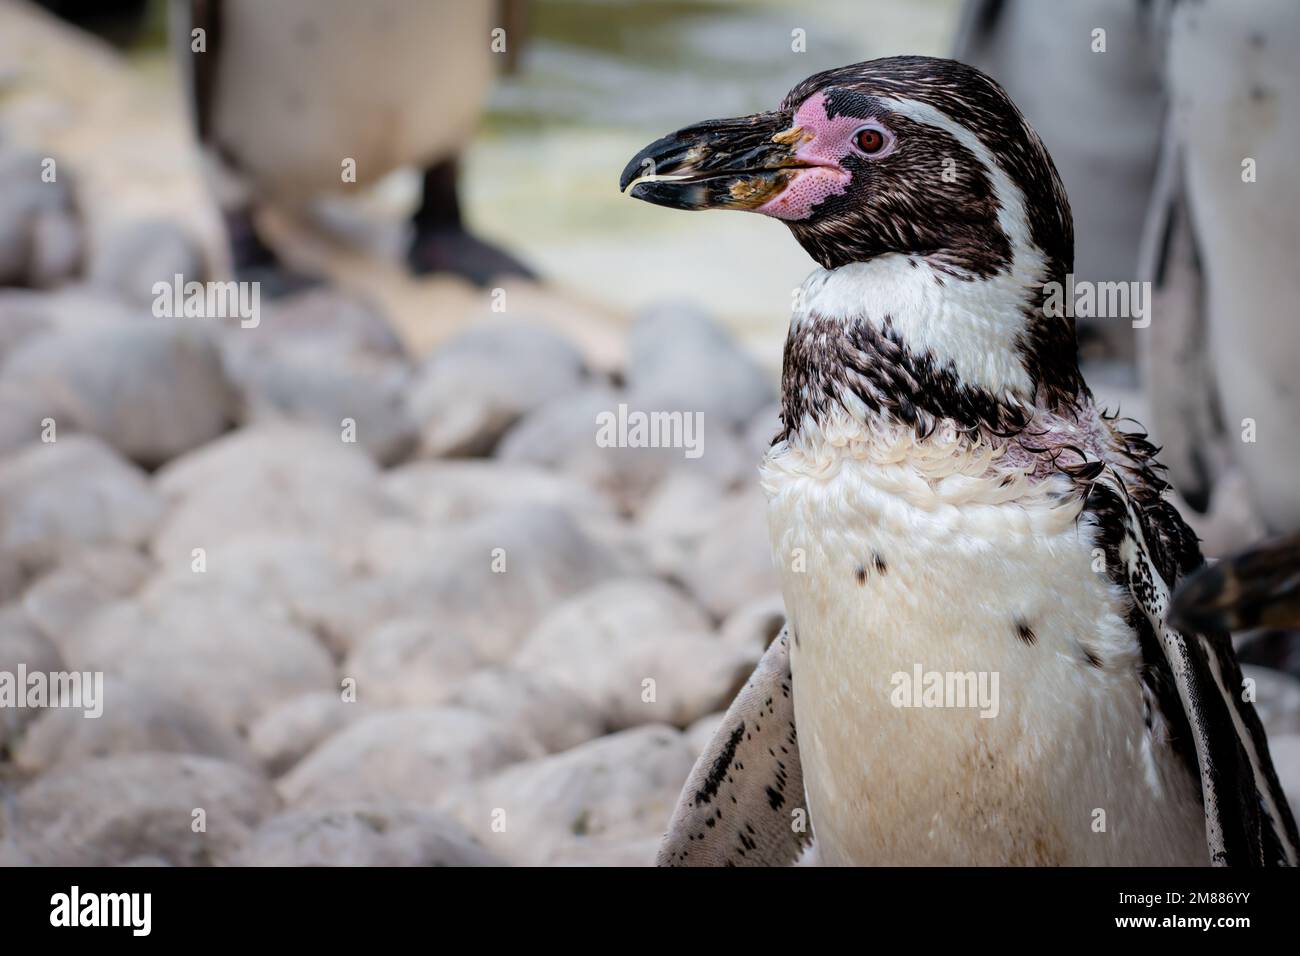 Humboldt penguin with red eye looking left Stock Photo